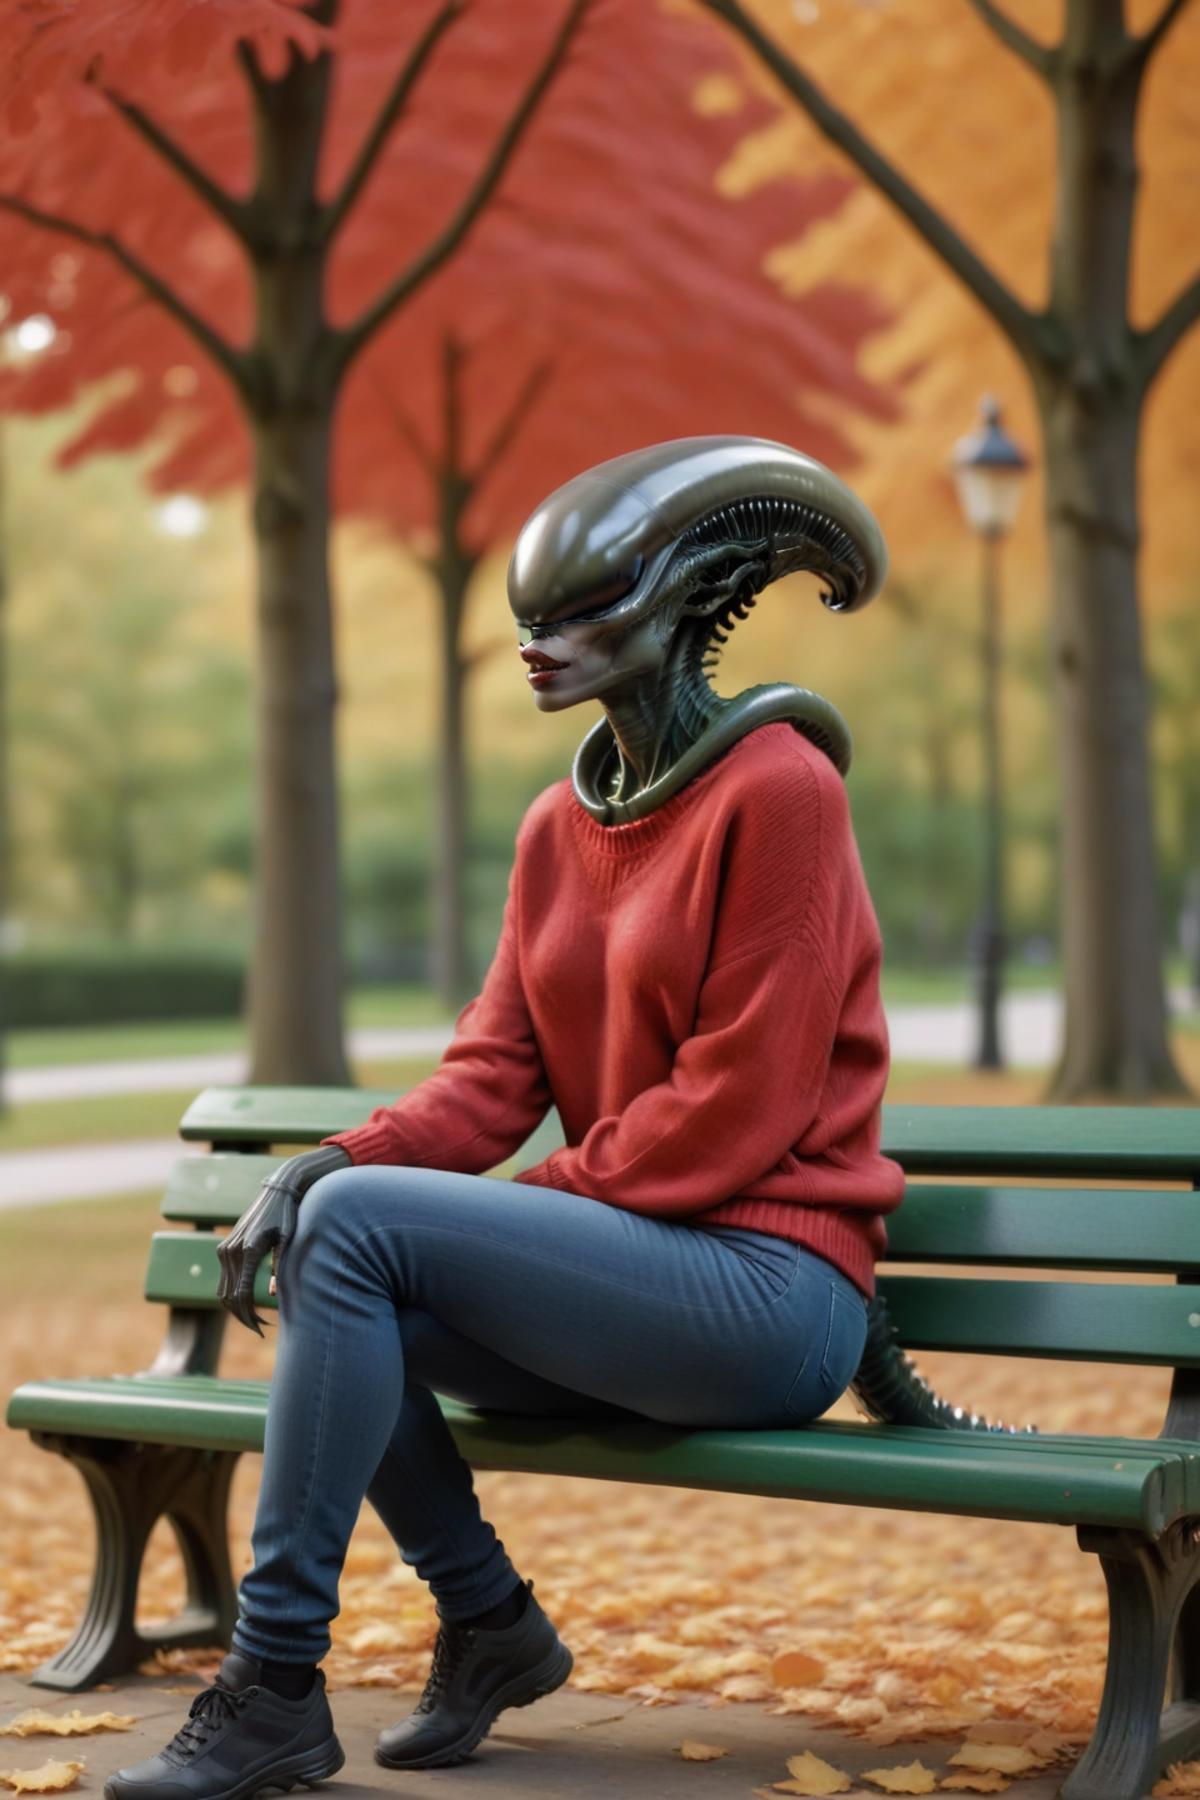 Woman sitting on a bench with an alien head and long tail.